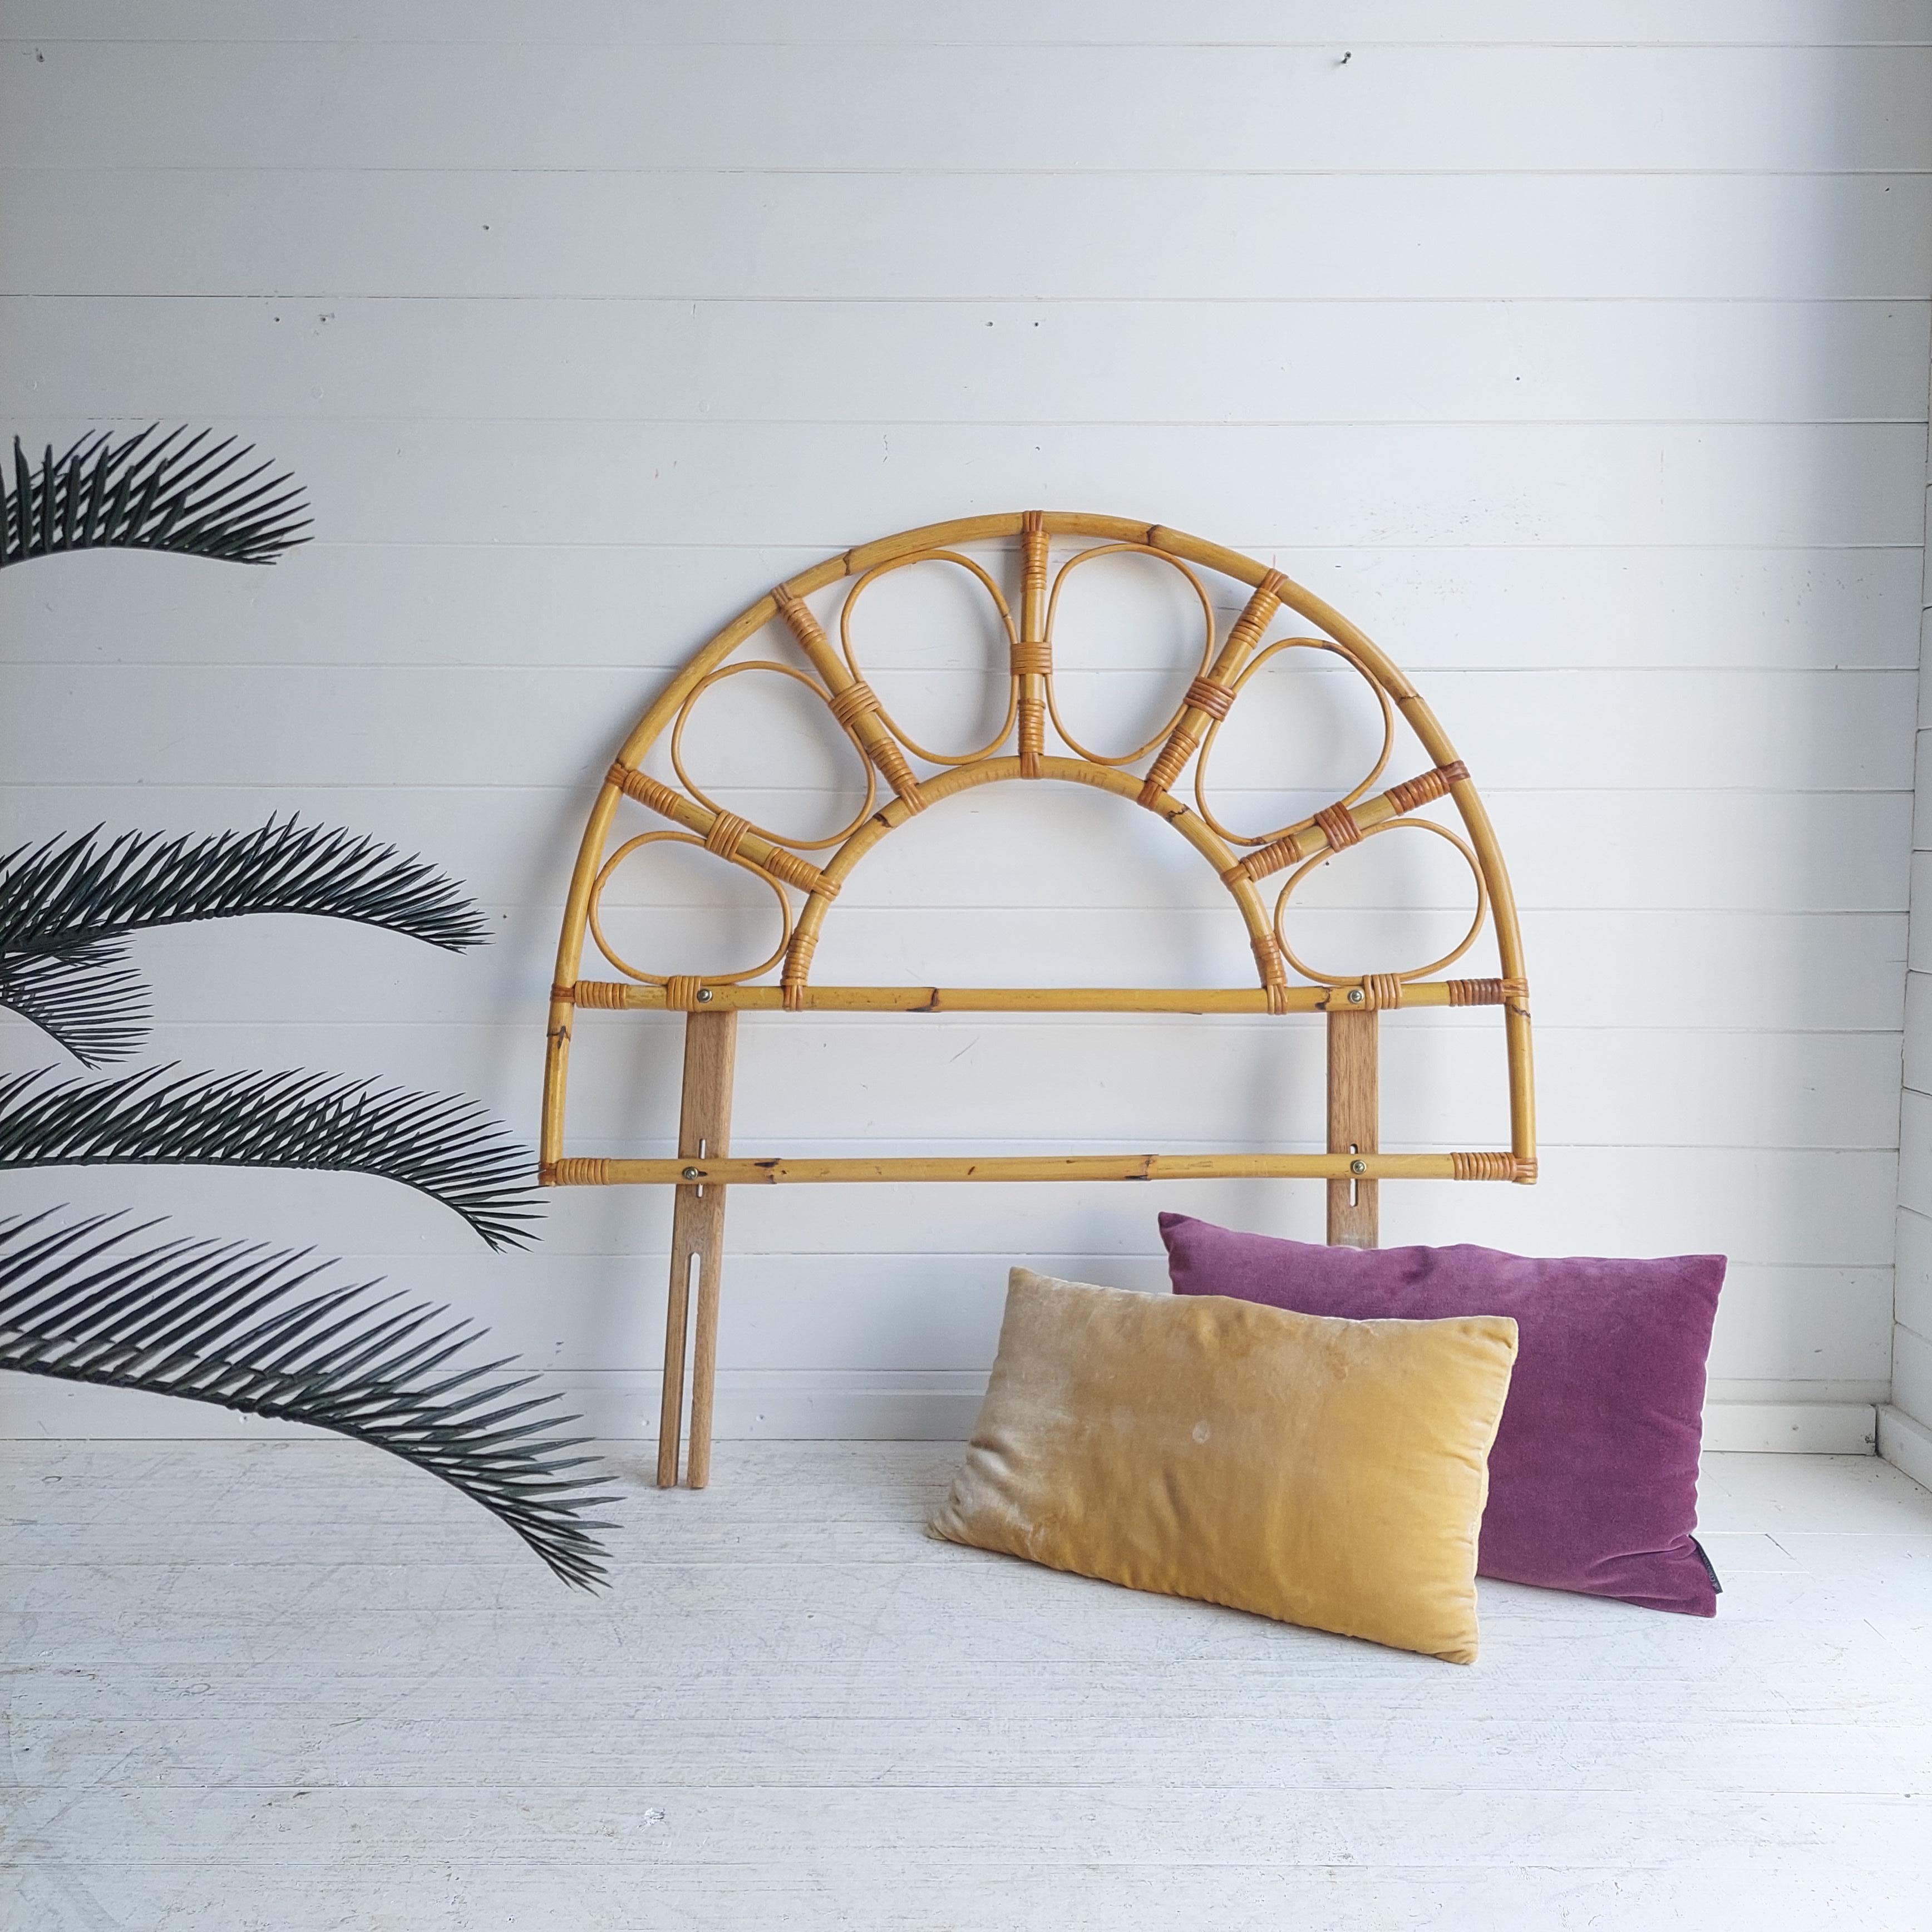 A stunning original vintage 1970's bamboo single headboard, beautiful arched design.
 1970s, rare and original, vintage bamboo & wicker peacock sunburst floral design. 
Gorgeous for those Scandi trends
It would look amazing in a child or teenagers